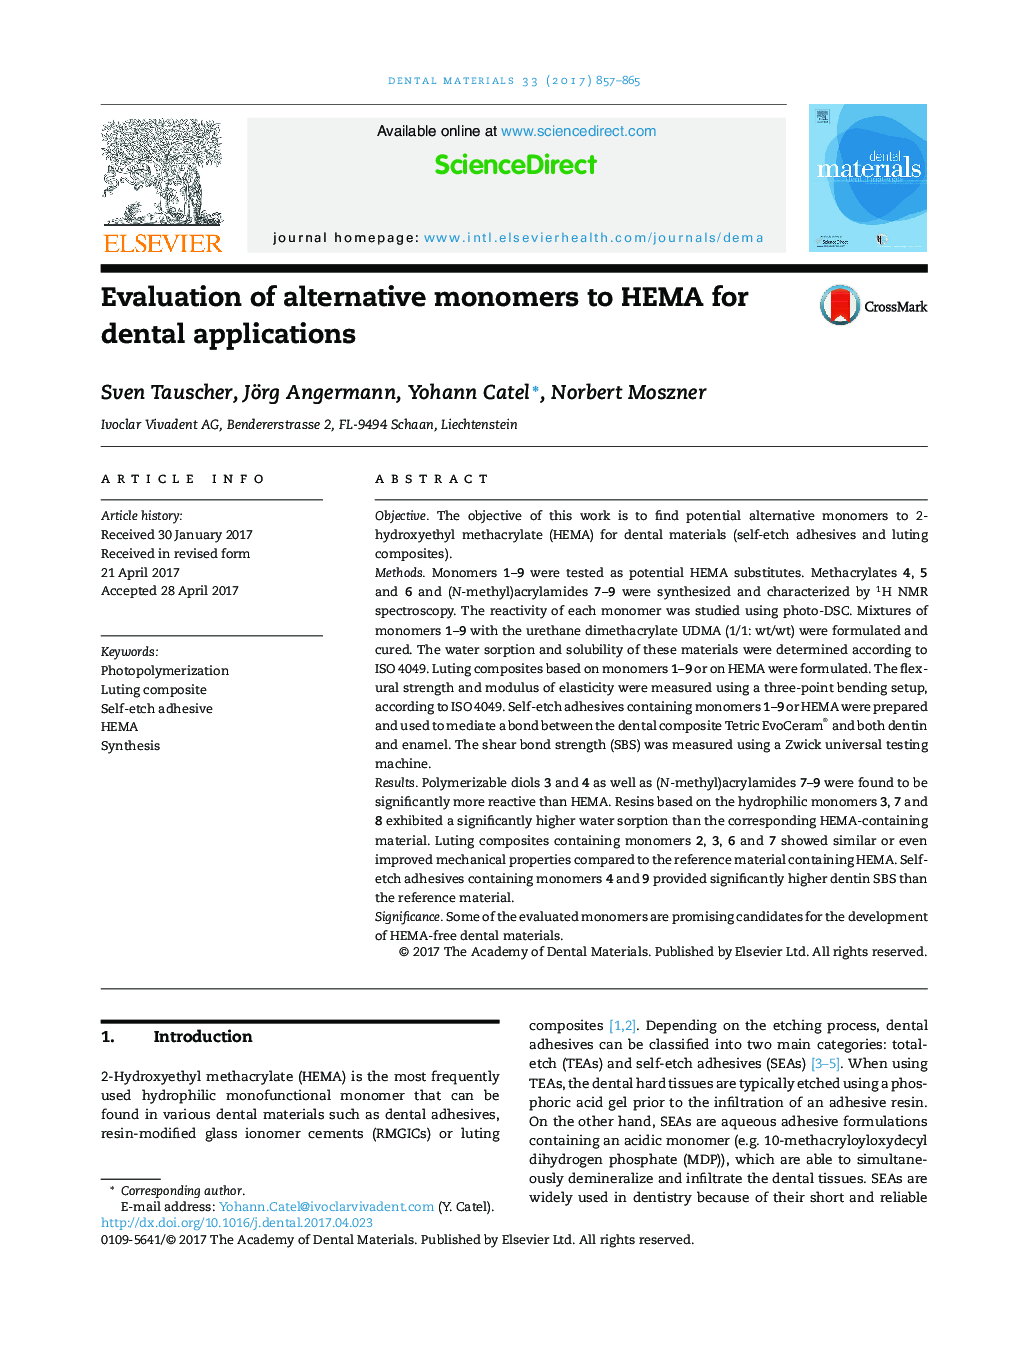 Evaluation of alternative monomers to HEMA for dental applications